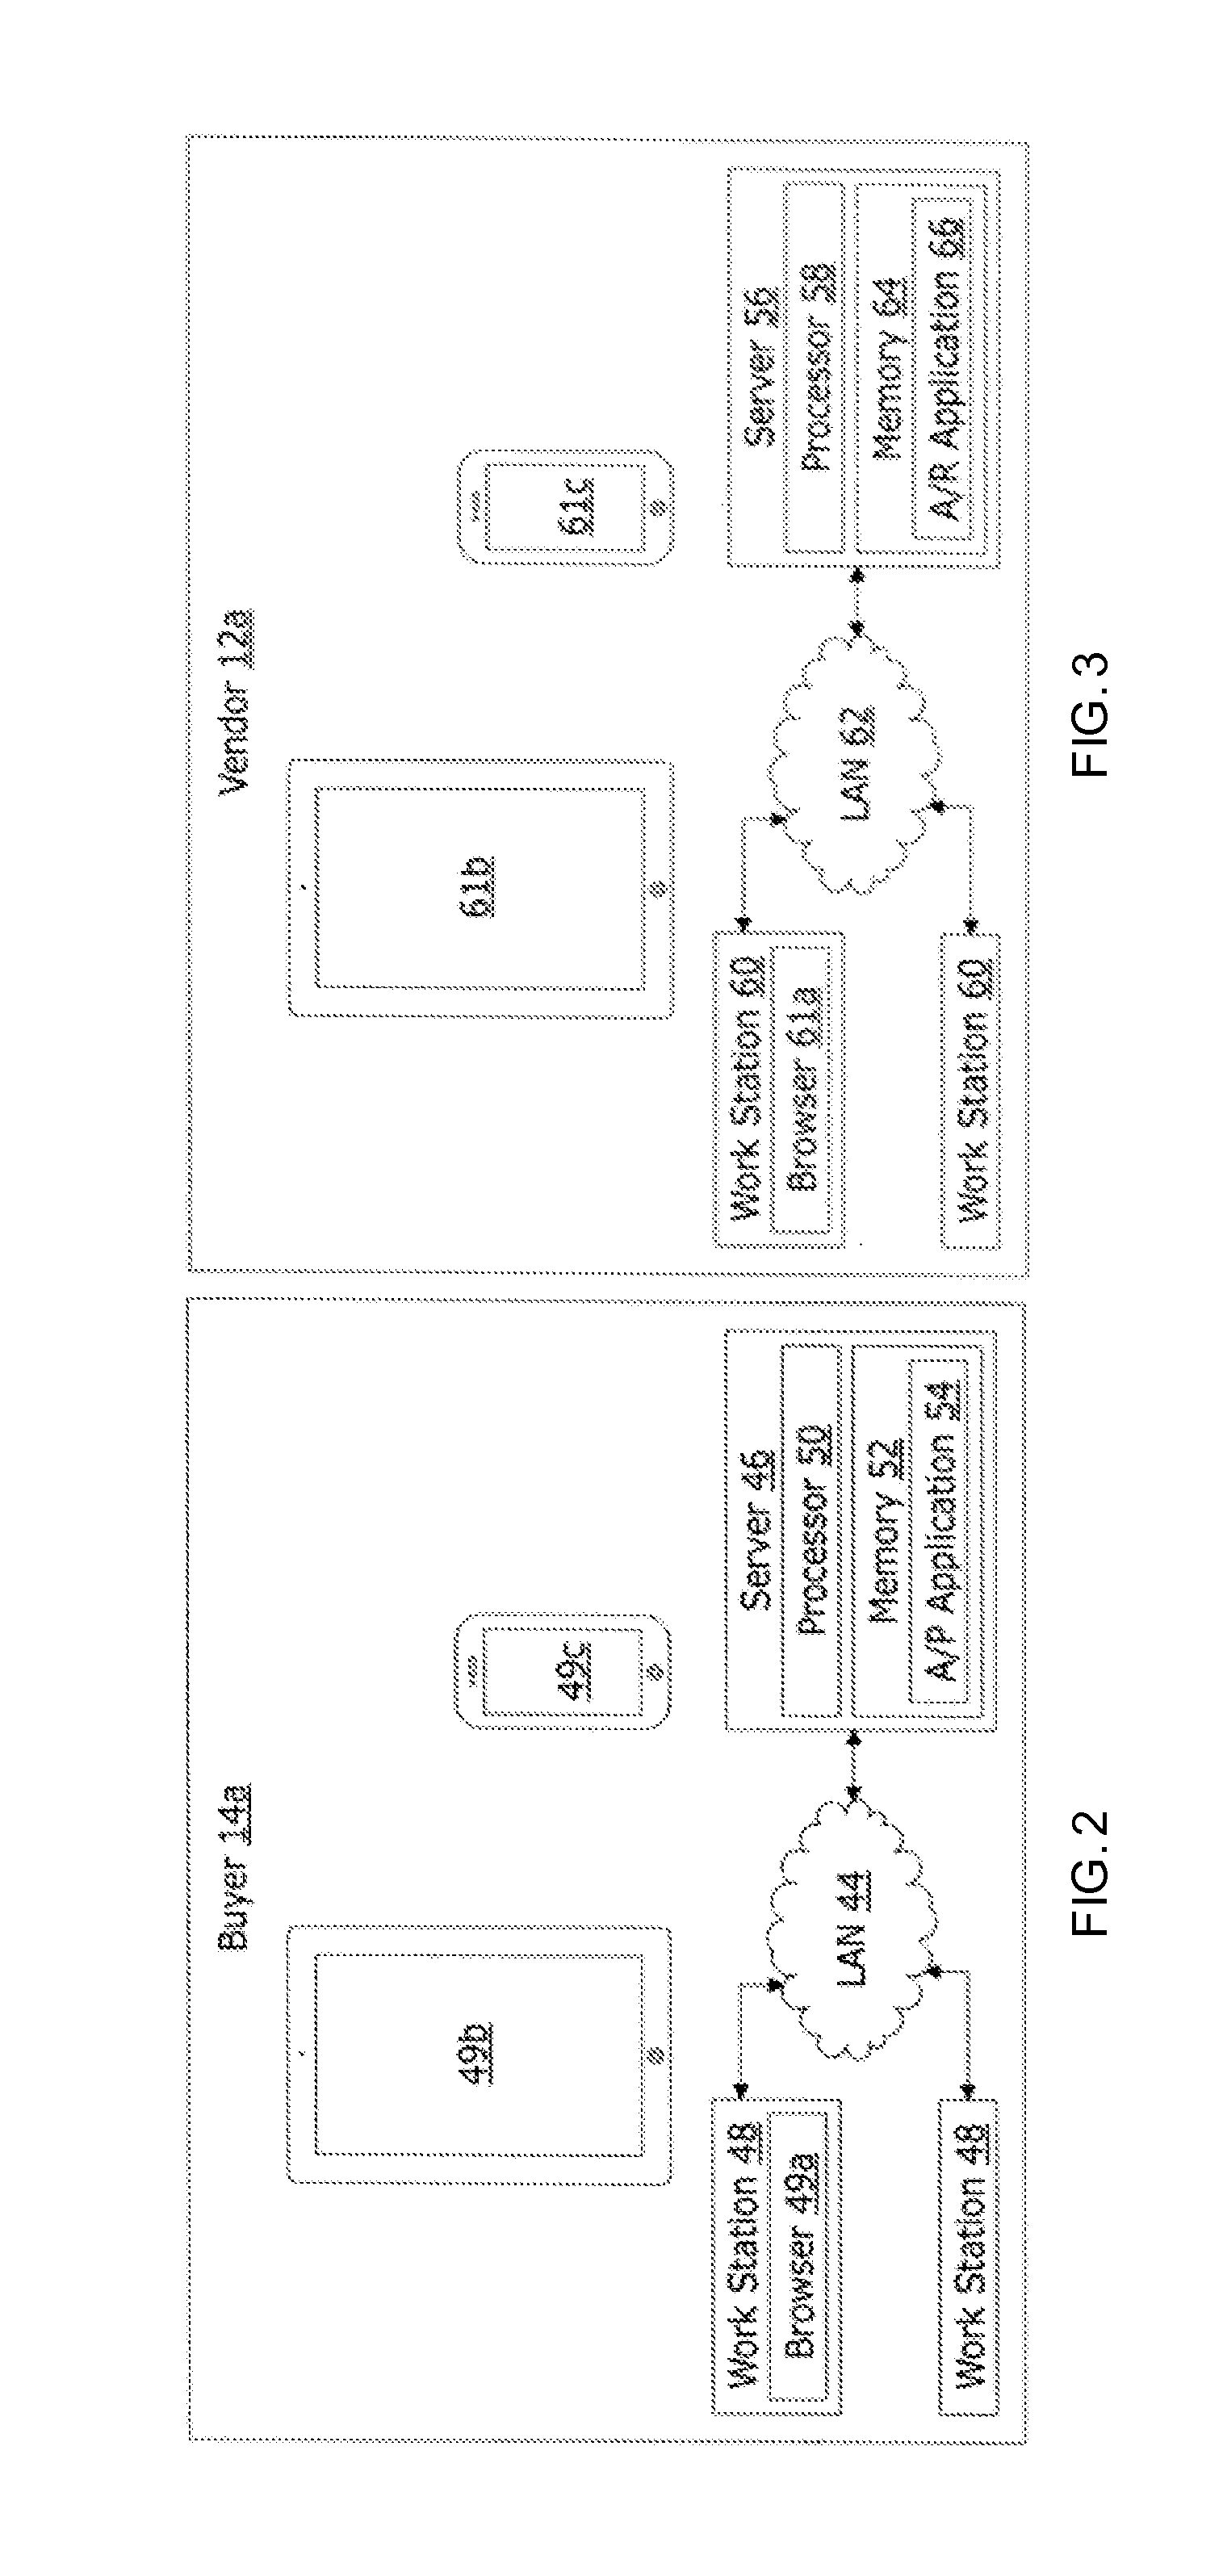 Vendor propensity analysis component for an electronic invoice payment system